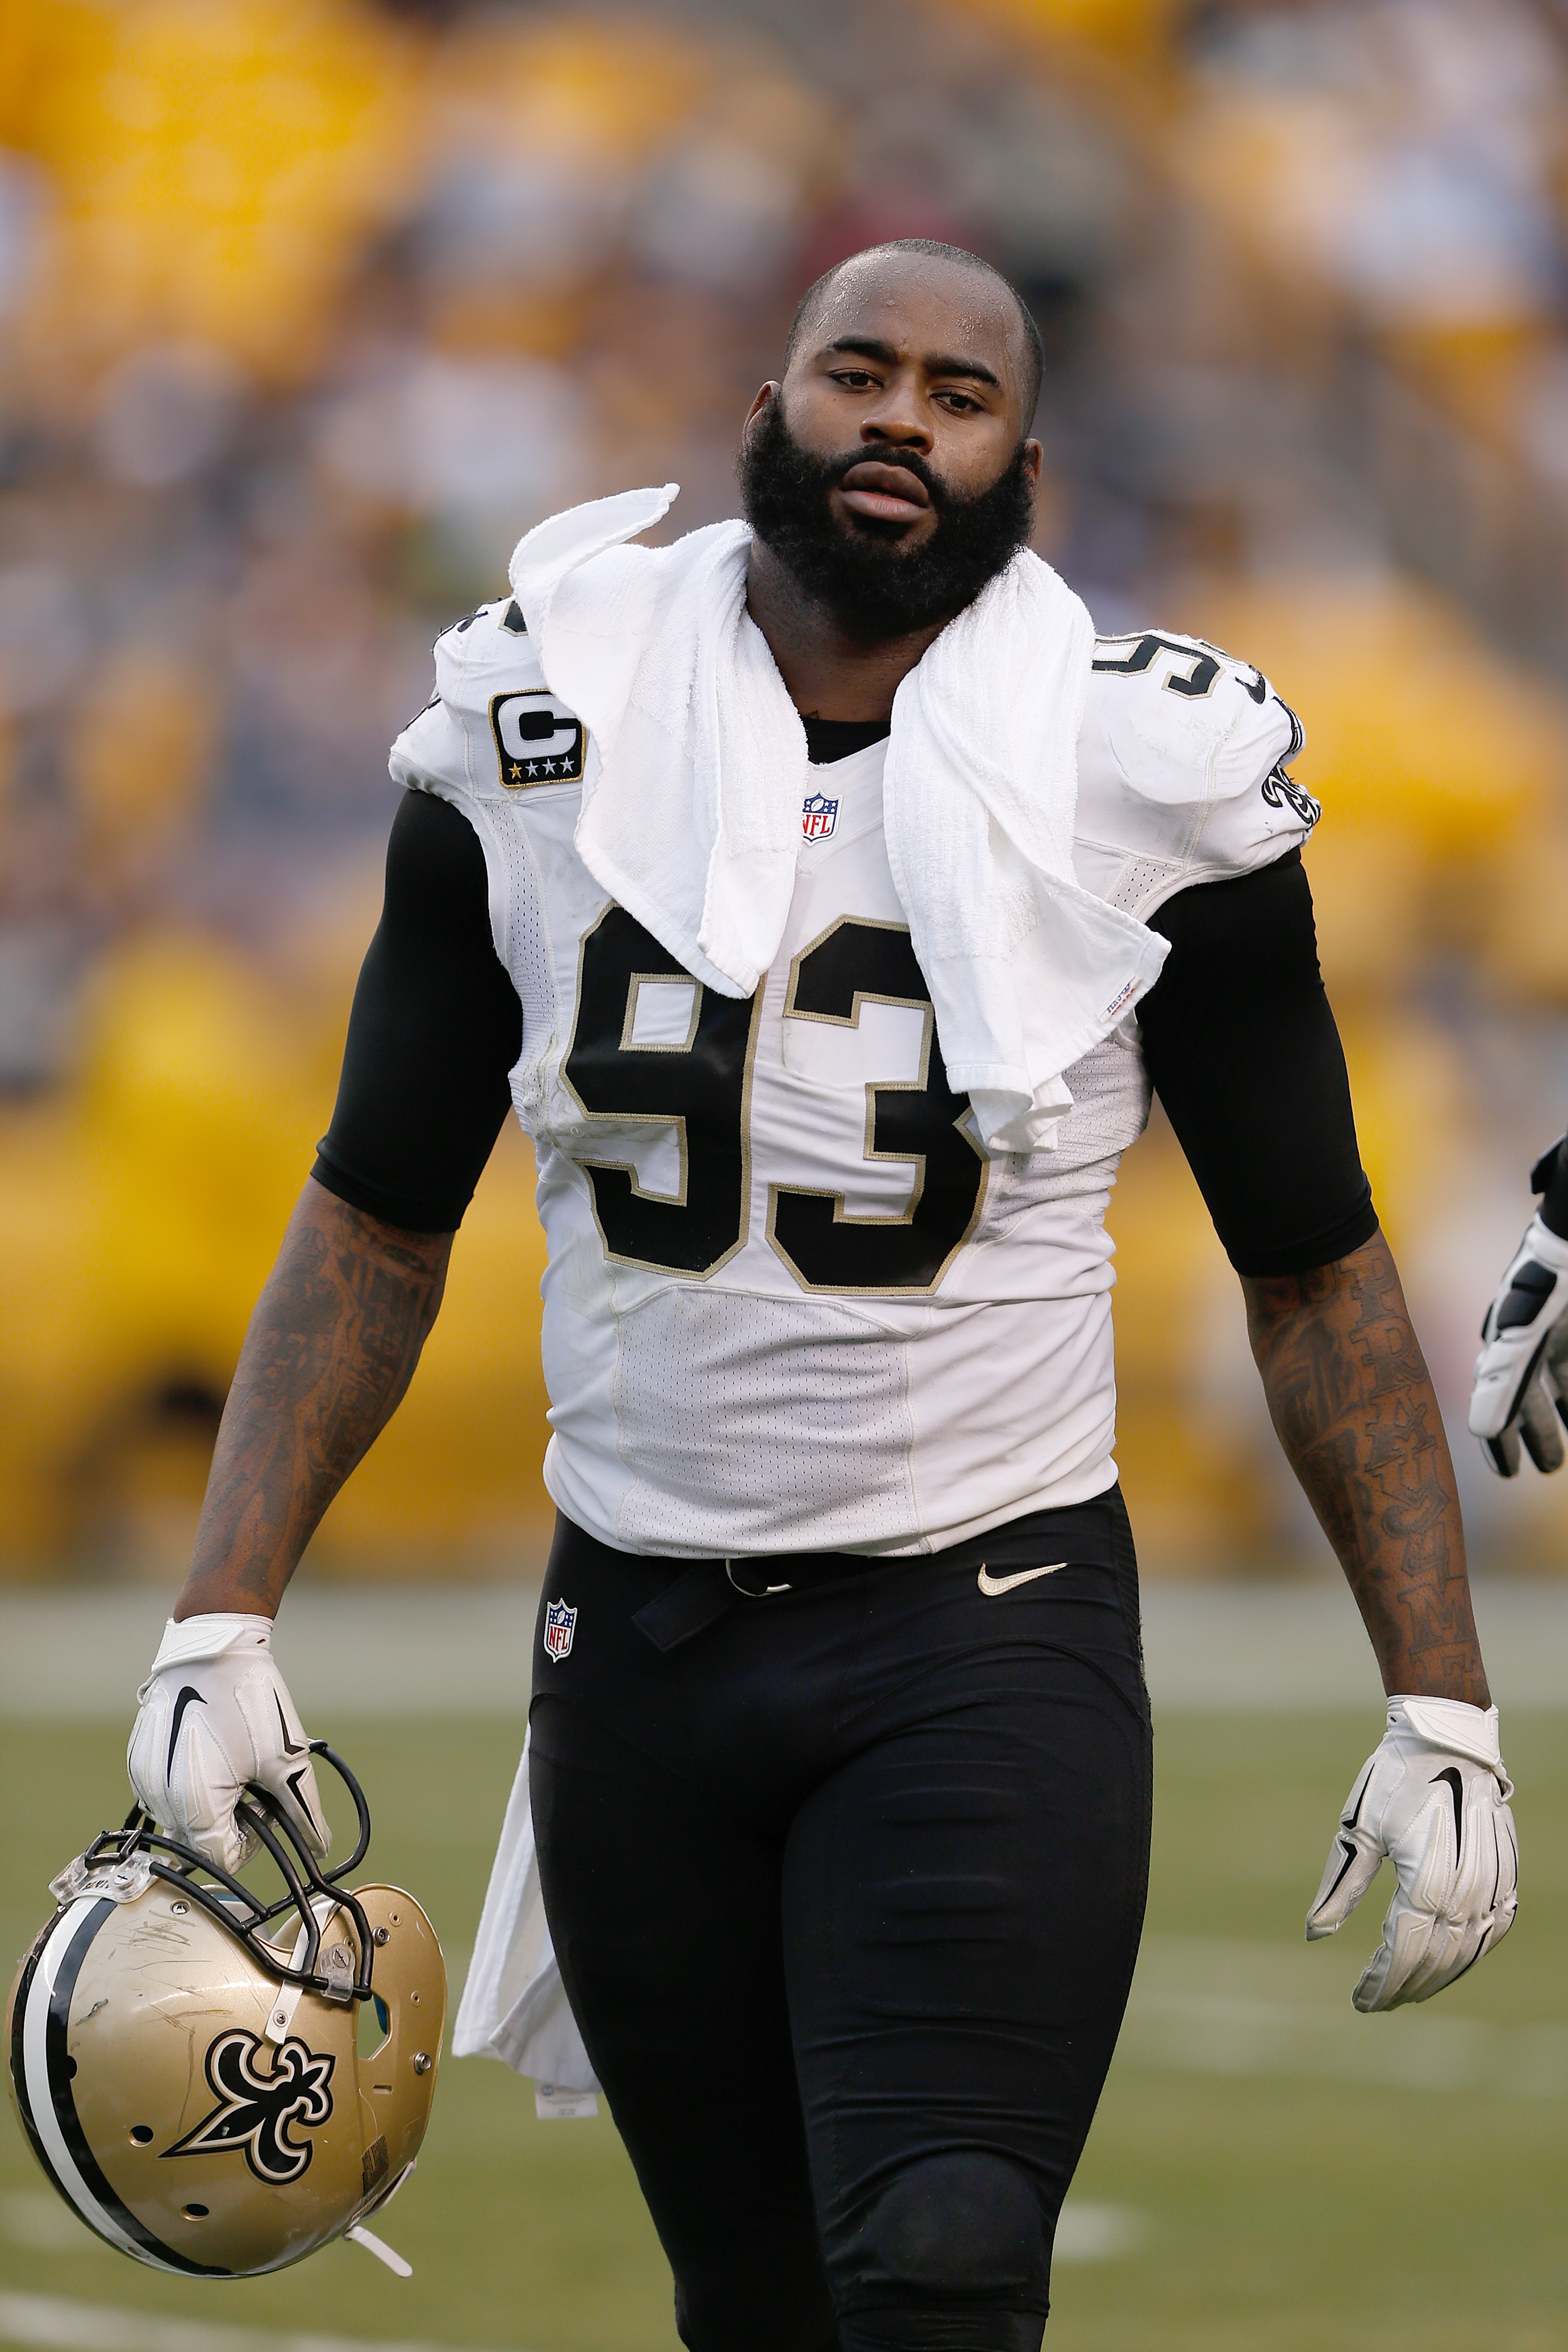 New Orleans Saints linebacker Junior Galette at the game against the Pittsburgh Steelers in Pittsburgh, Pa. on Nov. 30, 2014.